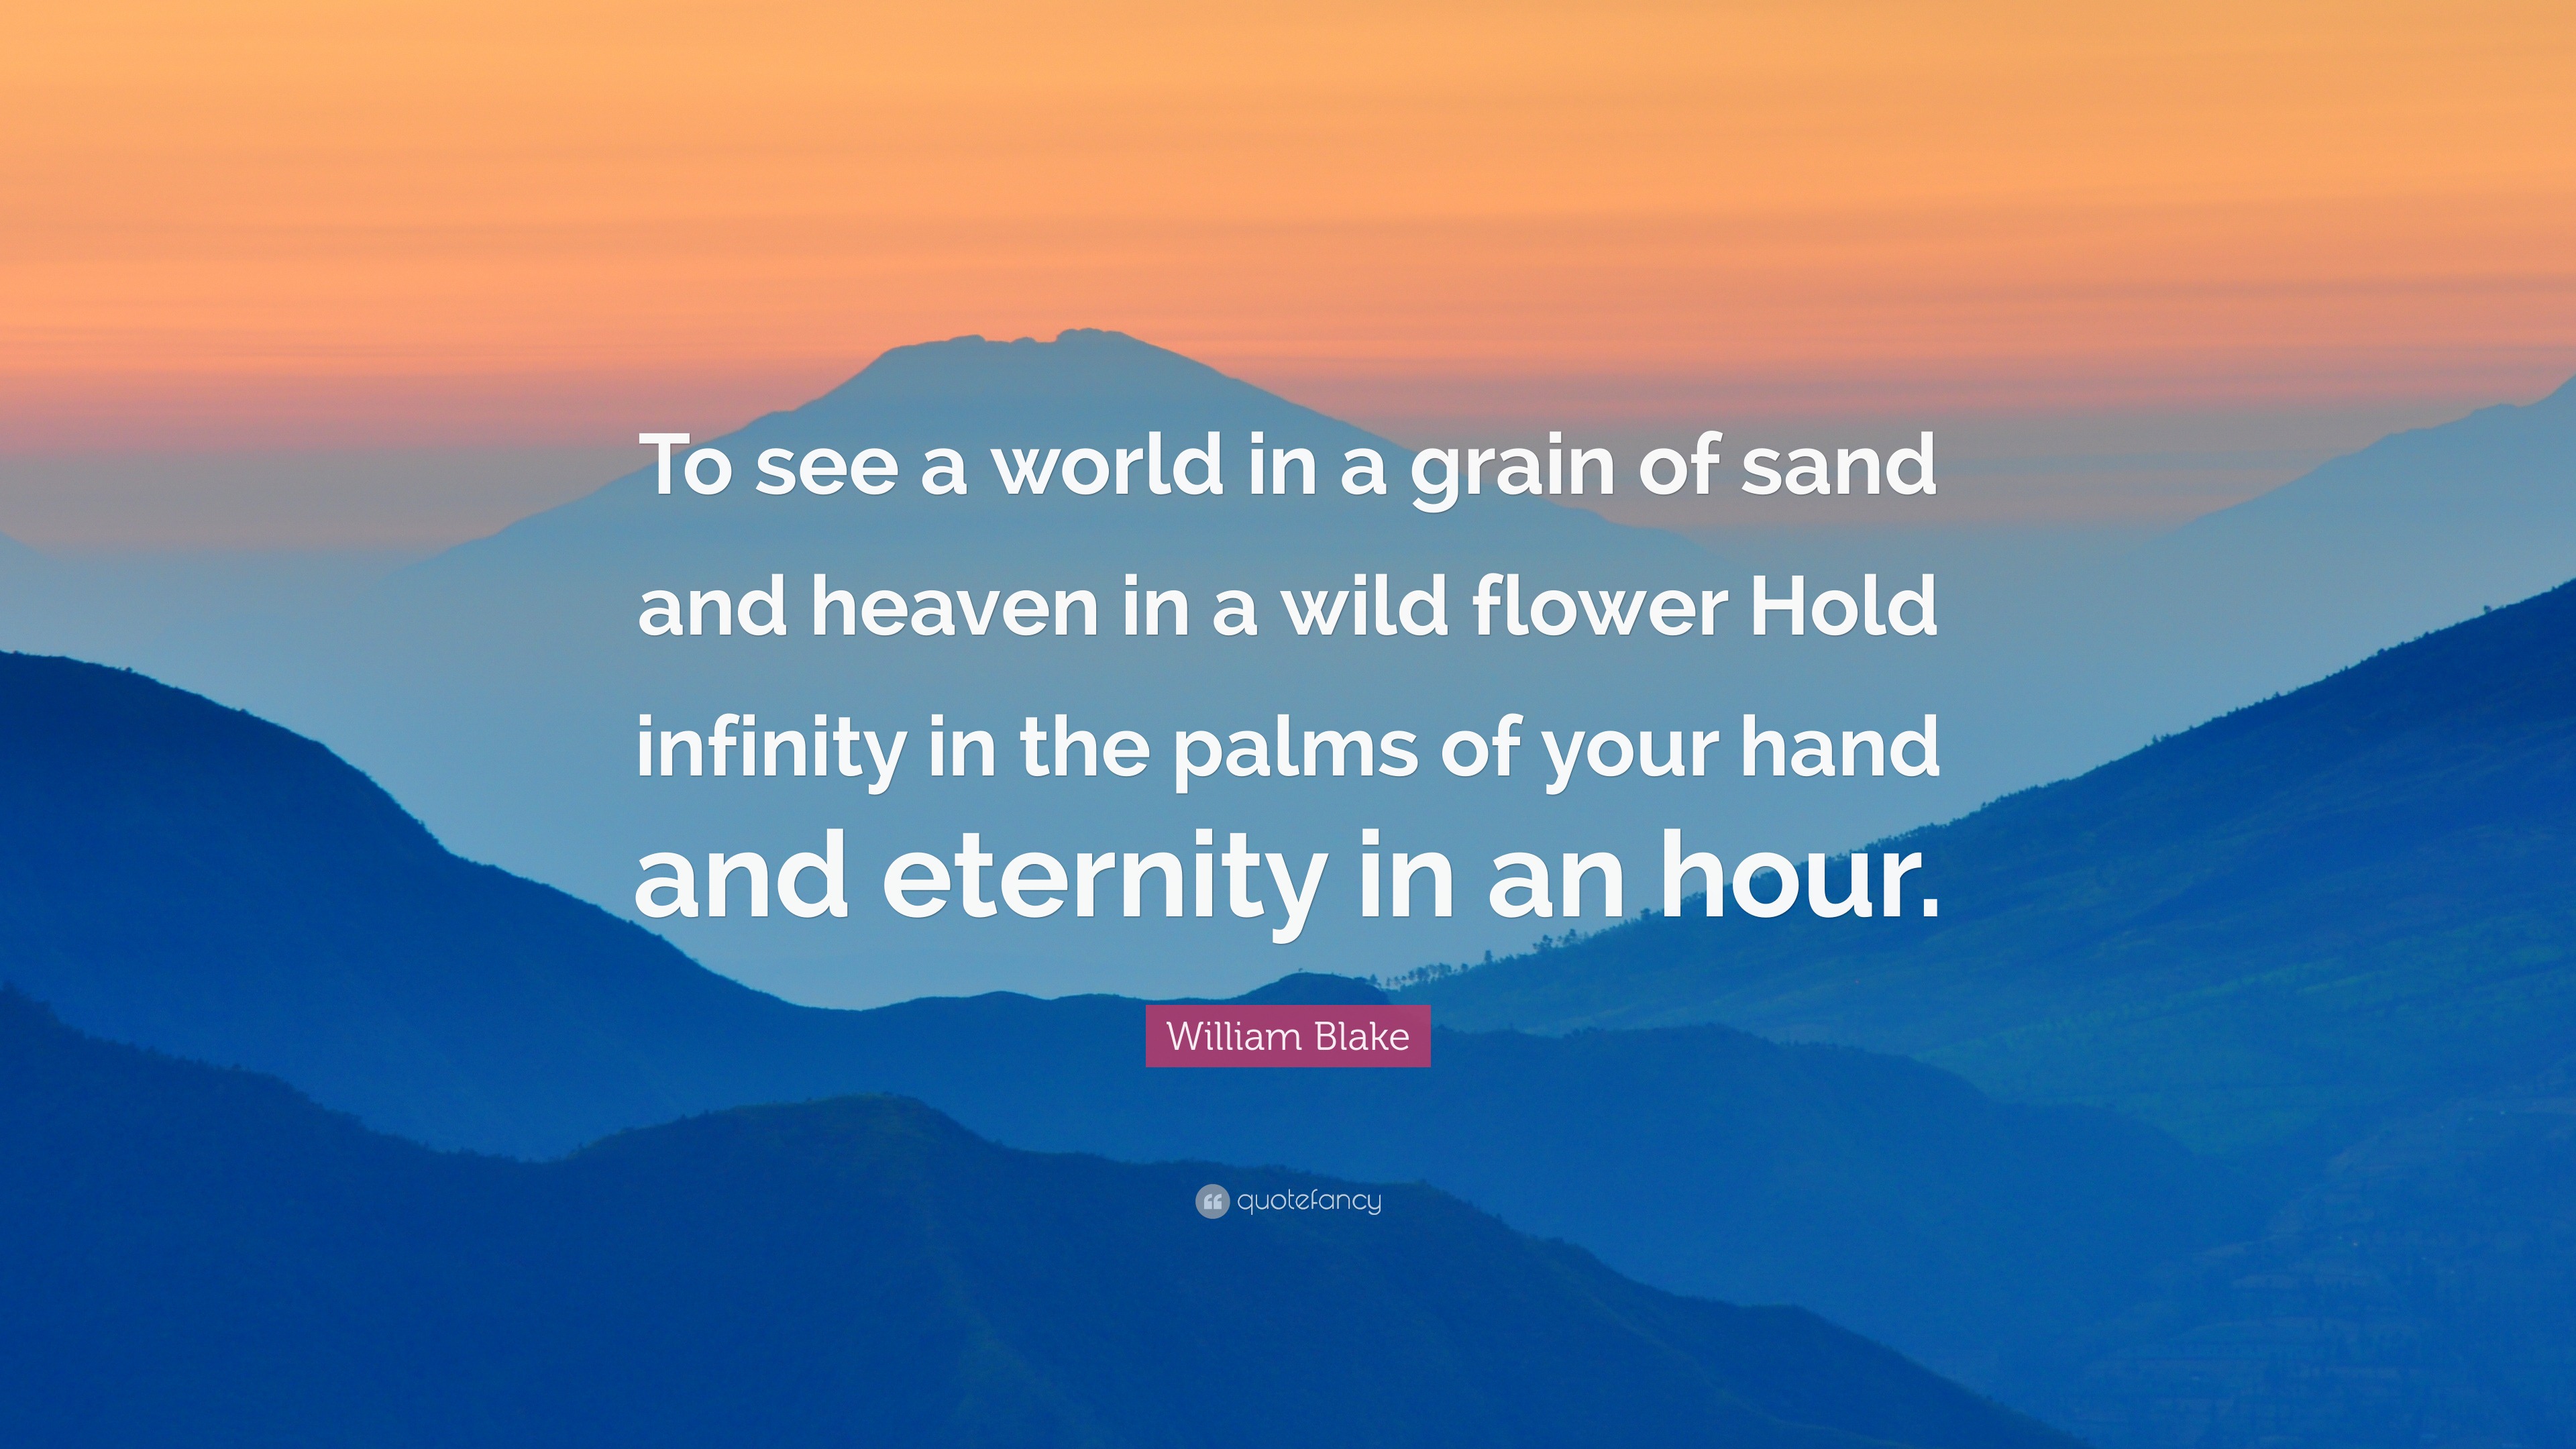 William Blake Quote: “To see a world in a grain of sand and heaven in a